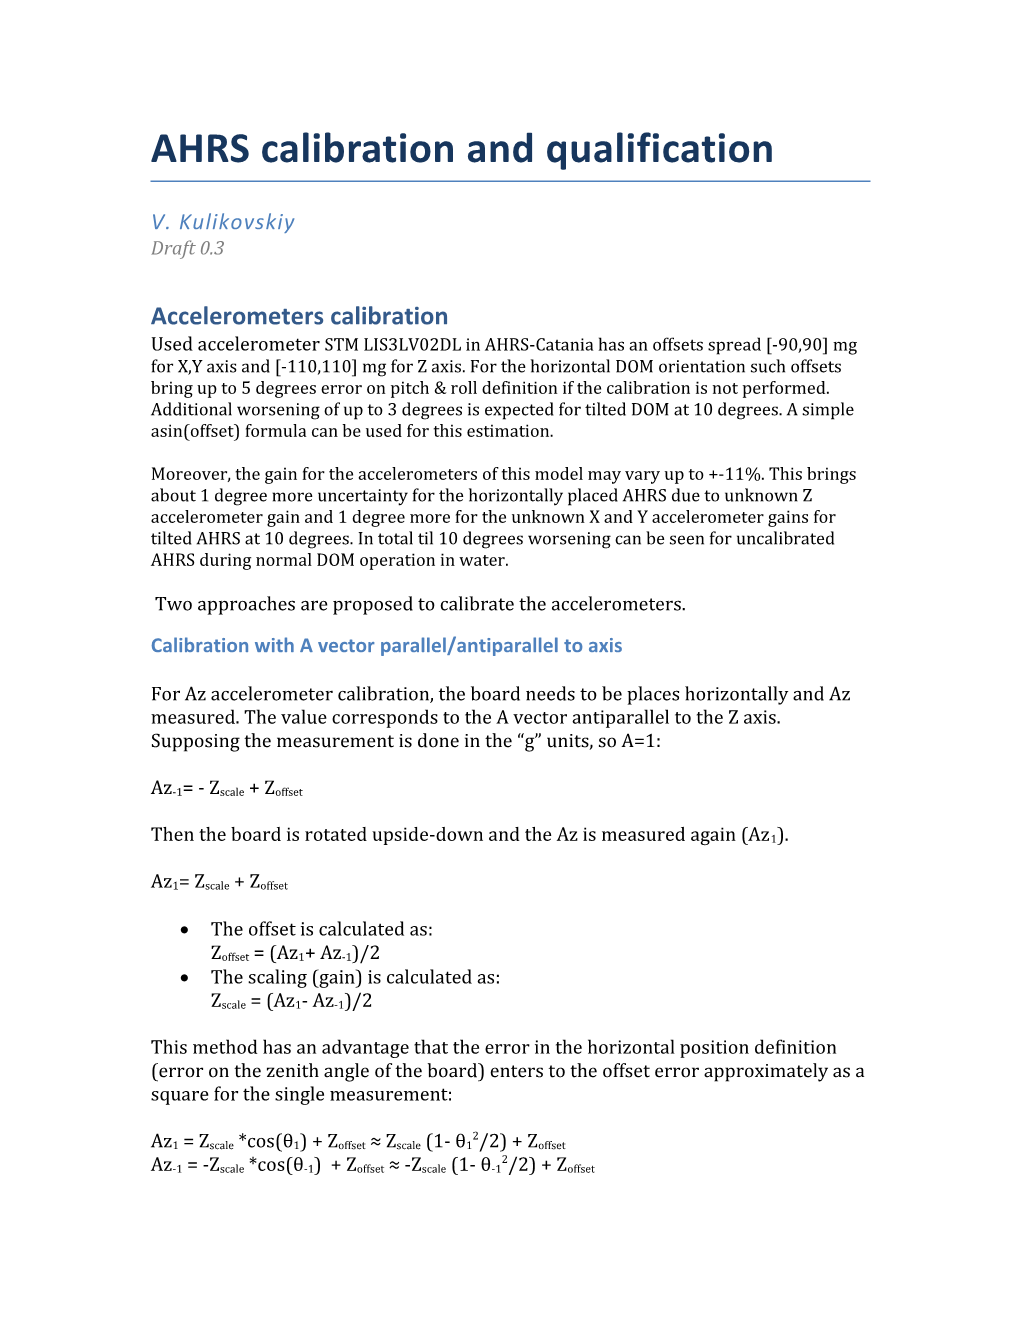 AHRS Calibration and Qualification